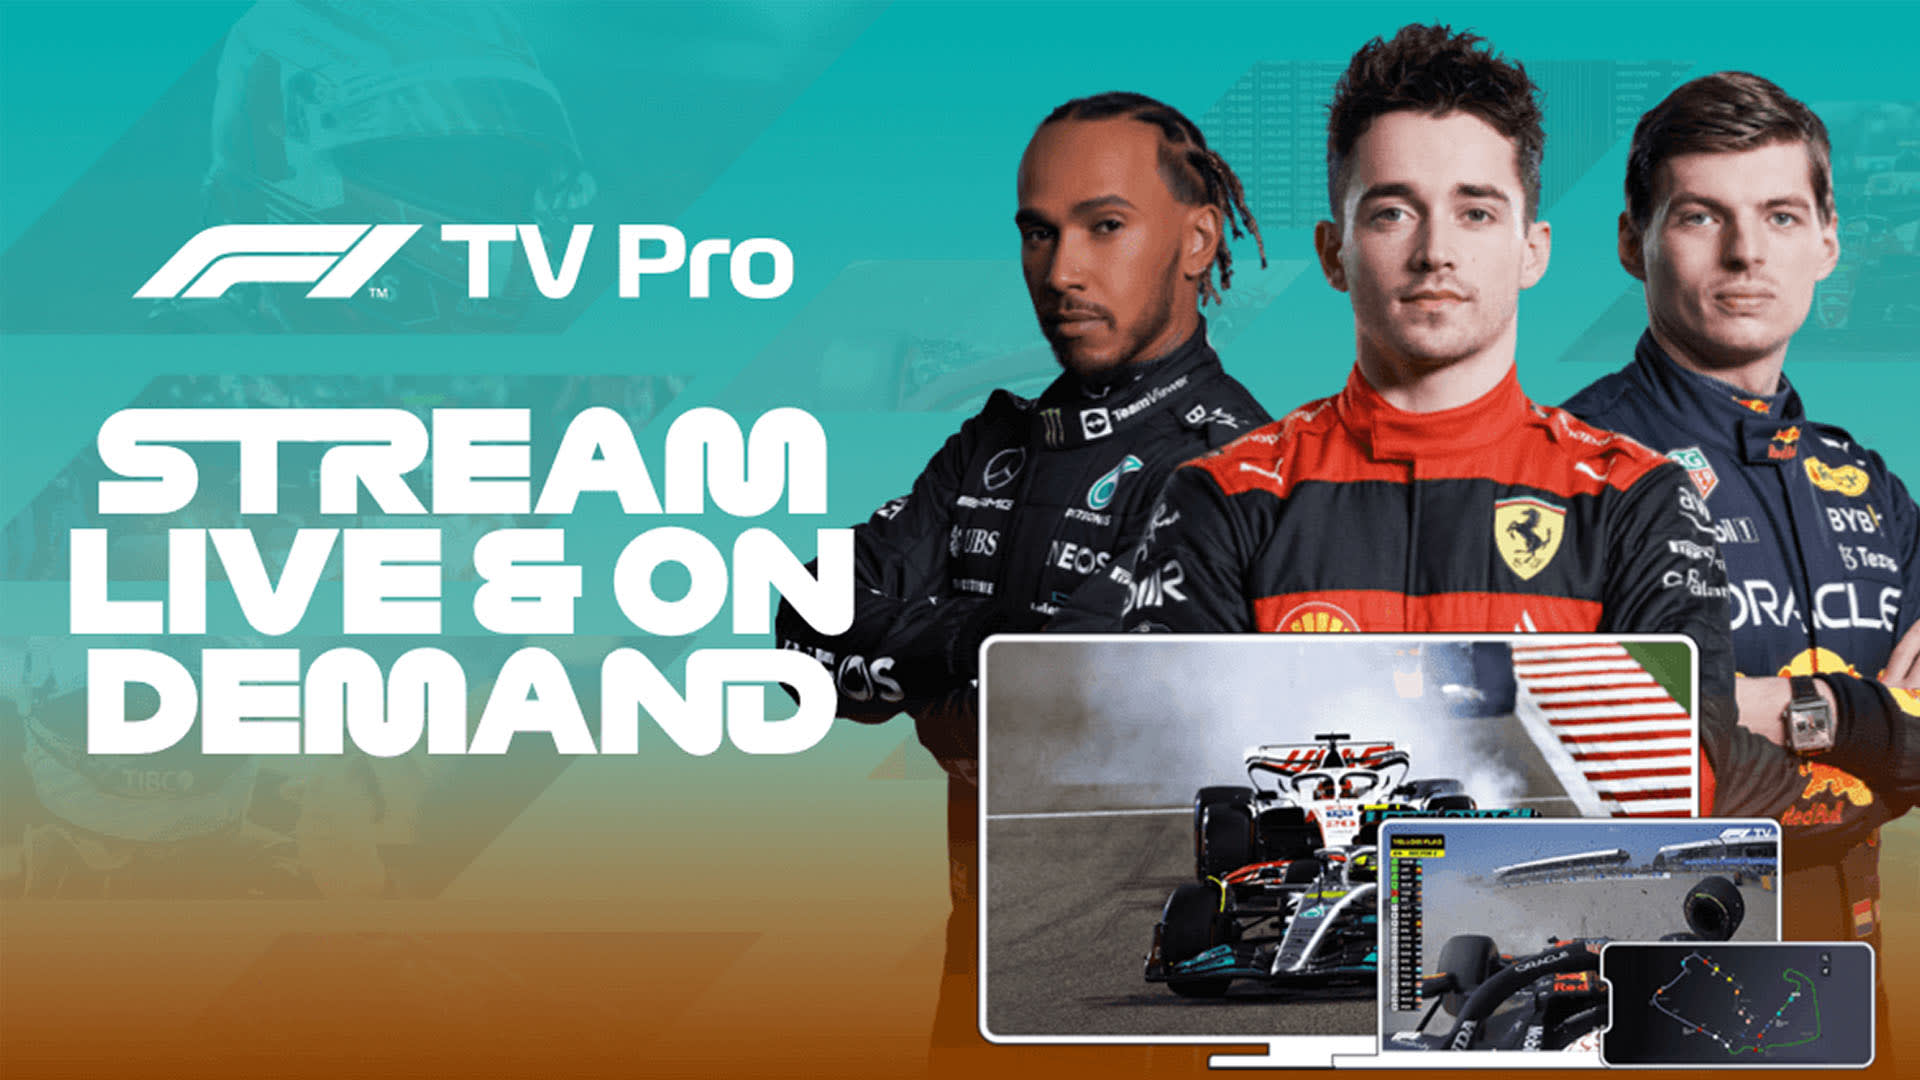 F1 TV PRO Don’t miss a minute of the action from the inaugural Miami